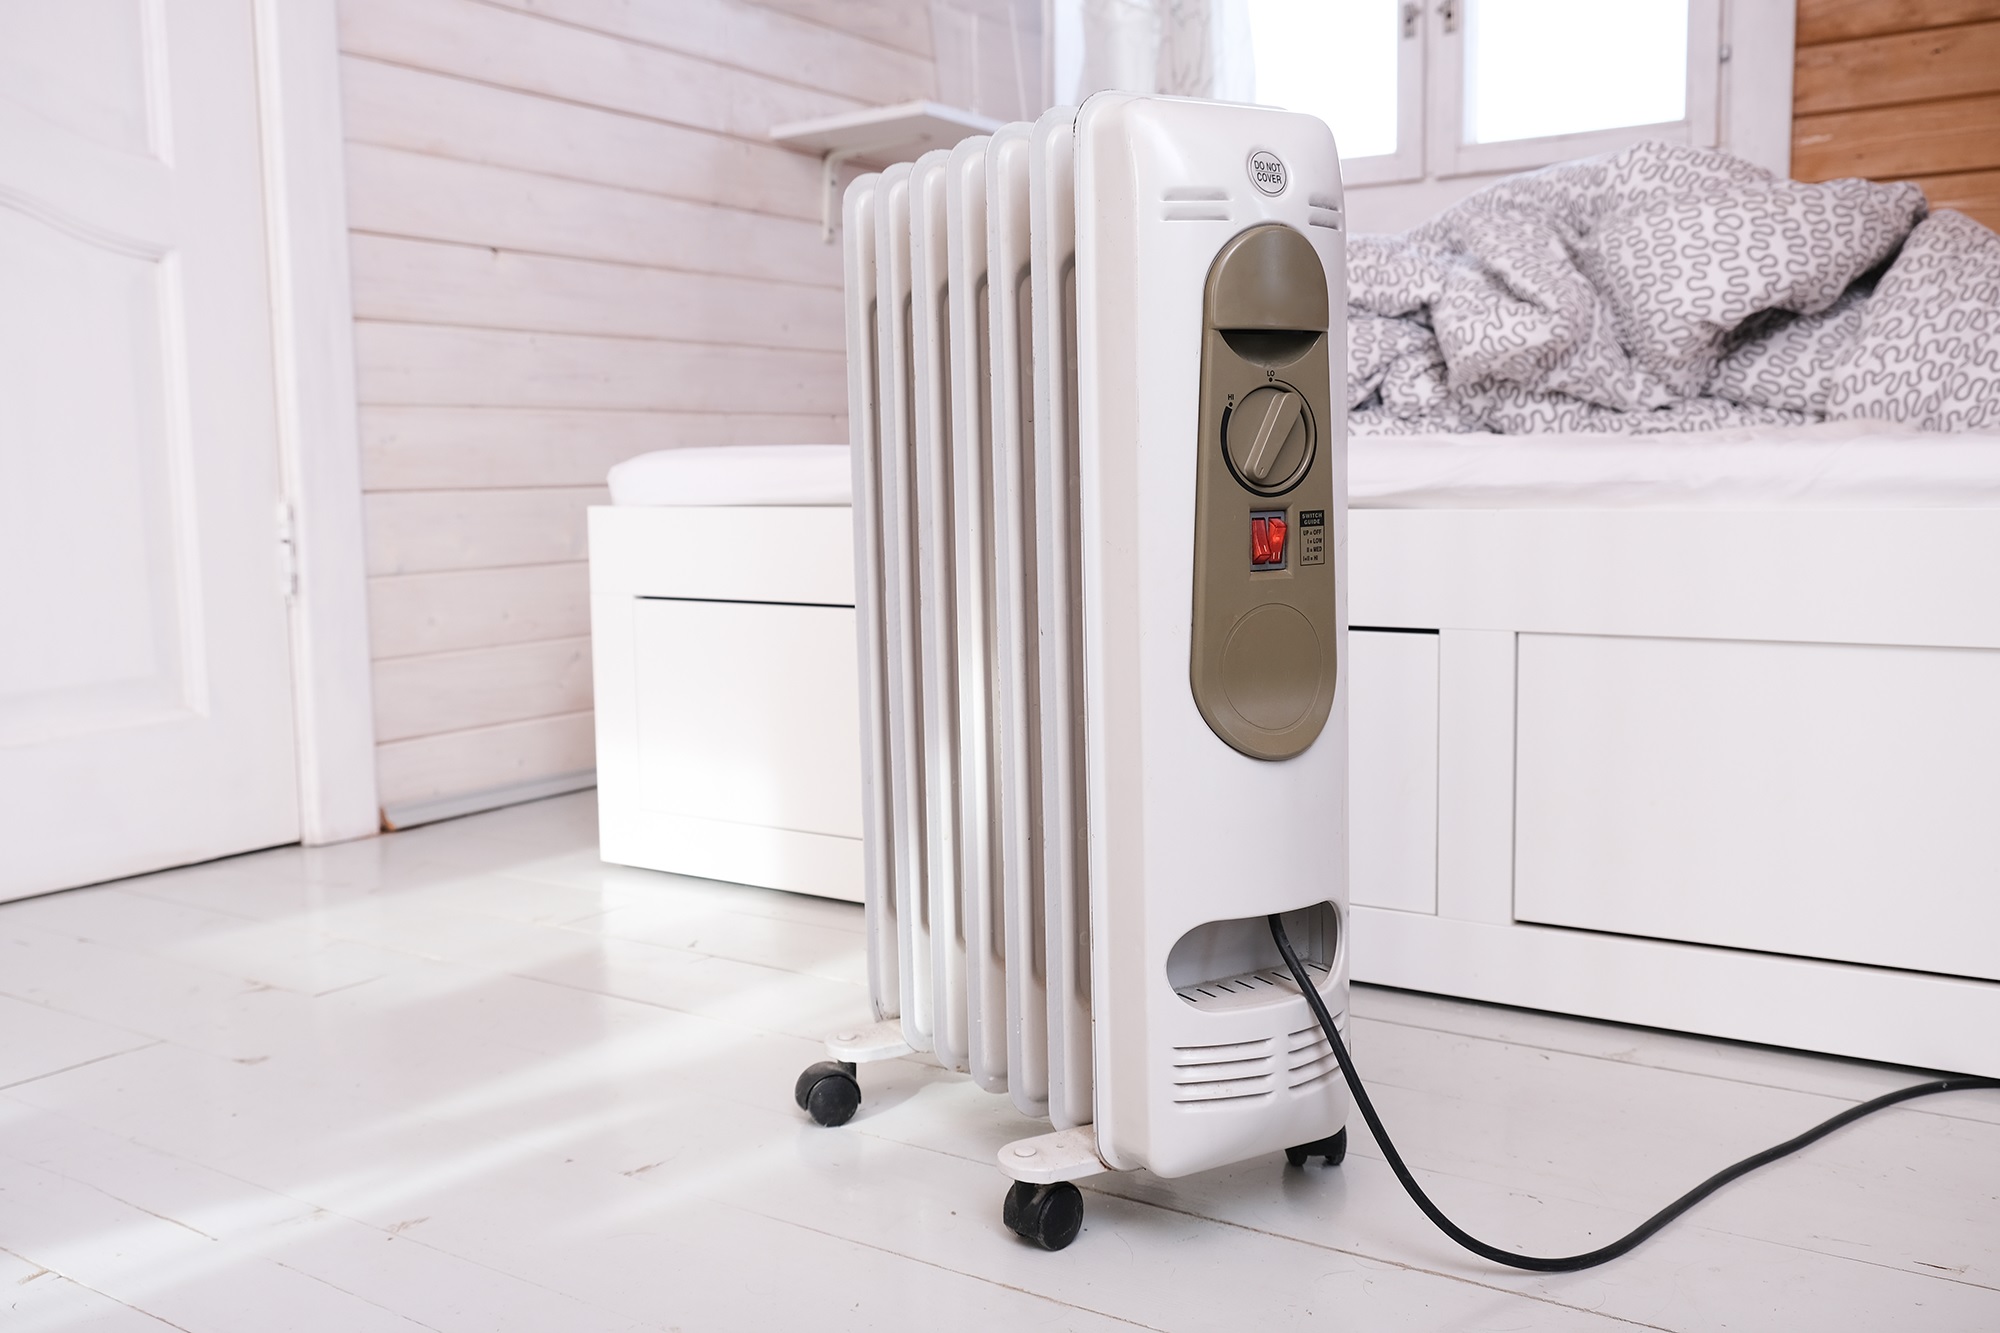 Electric heater. (Image: Shutterstock)